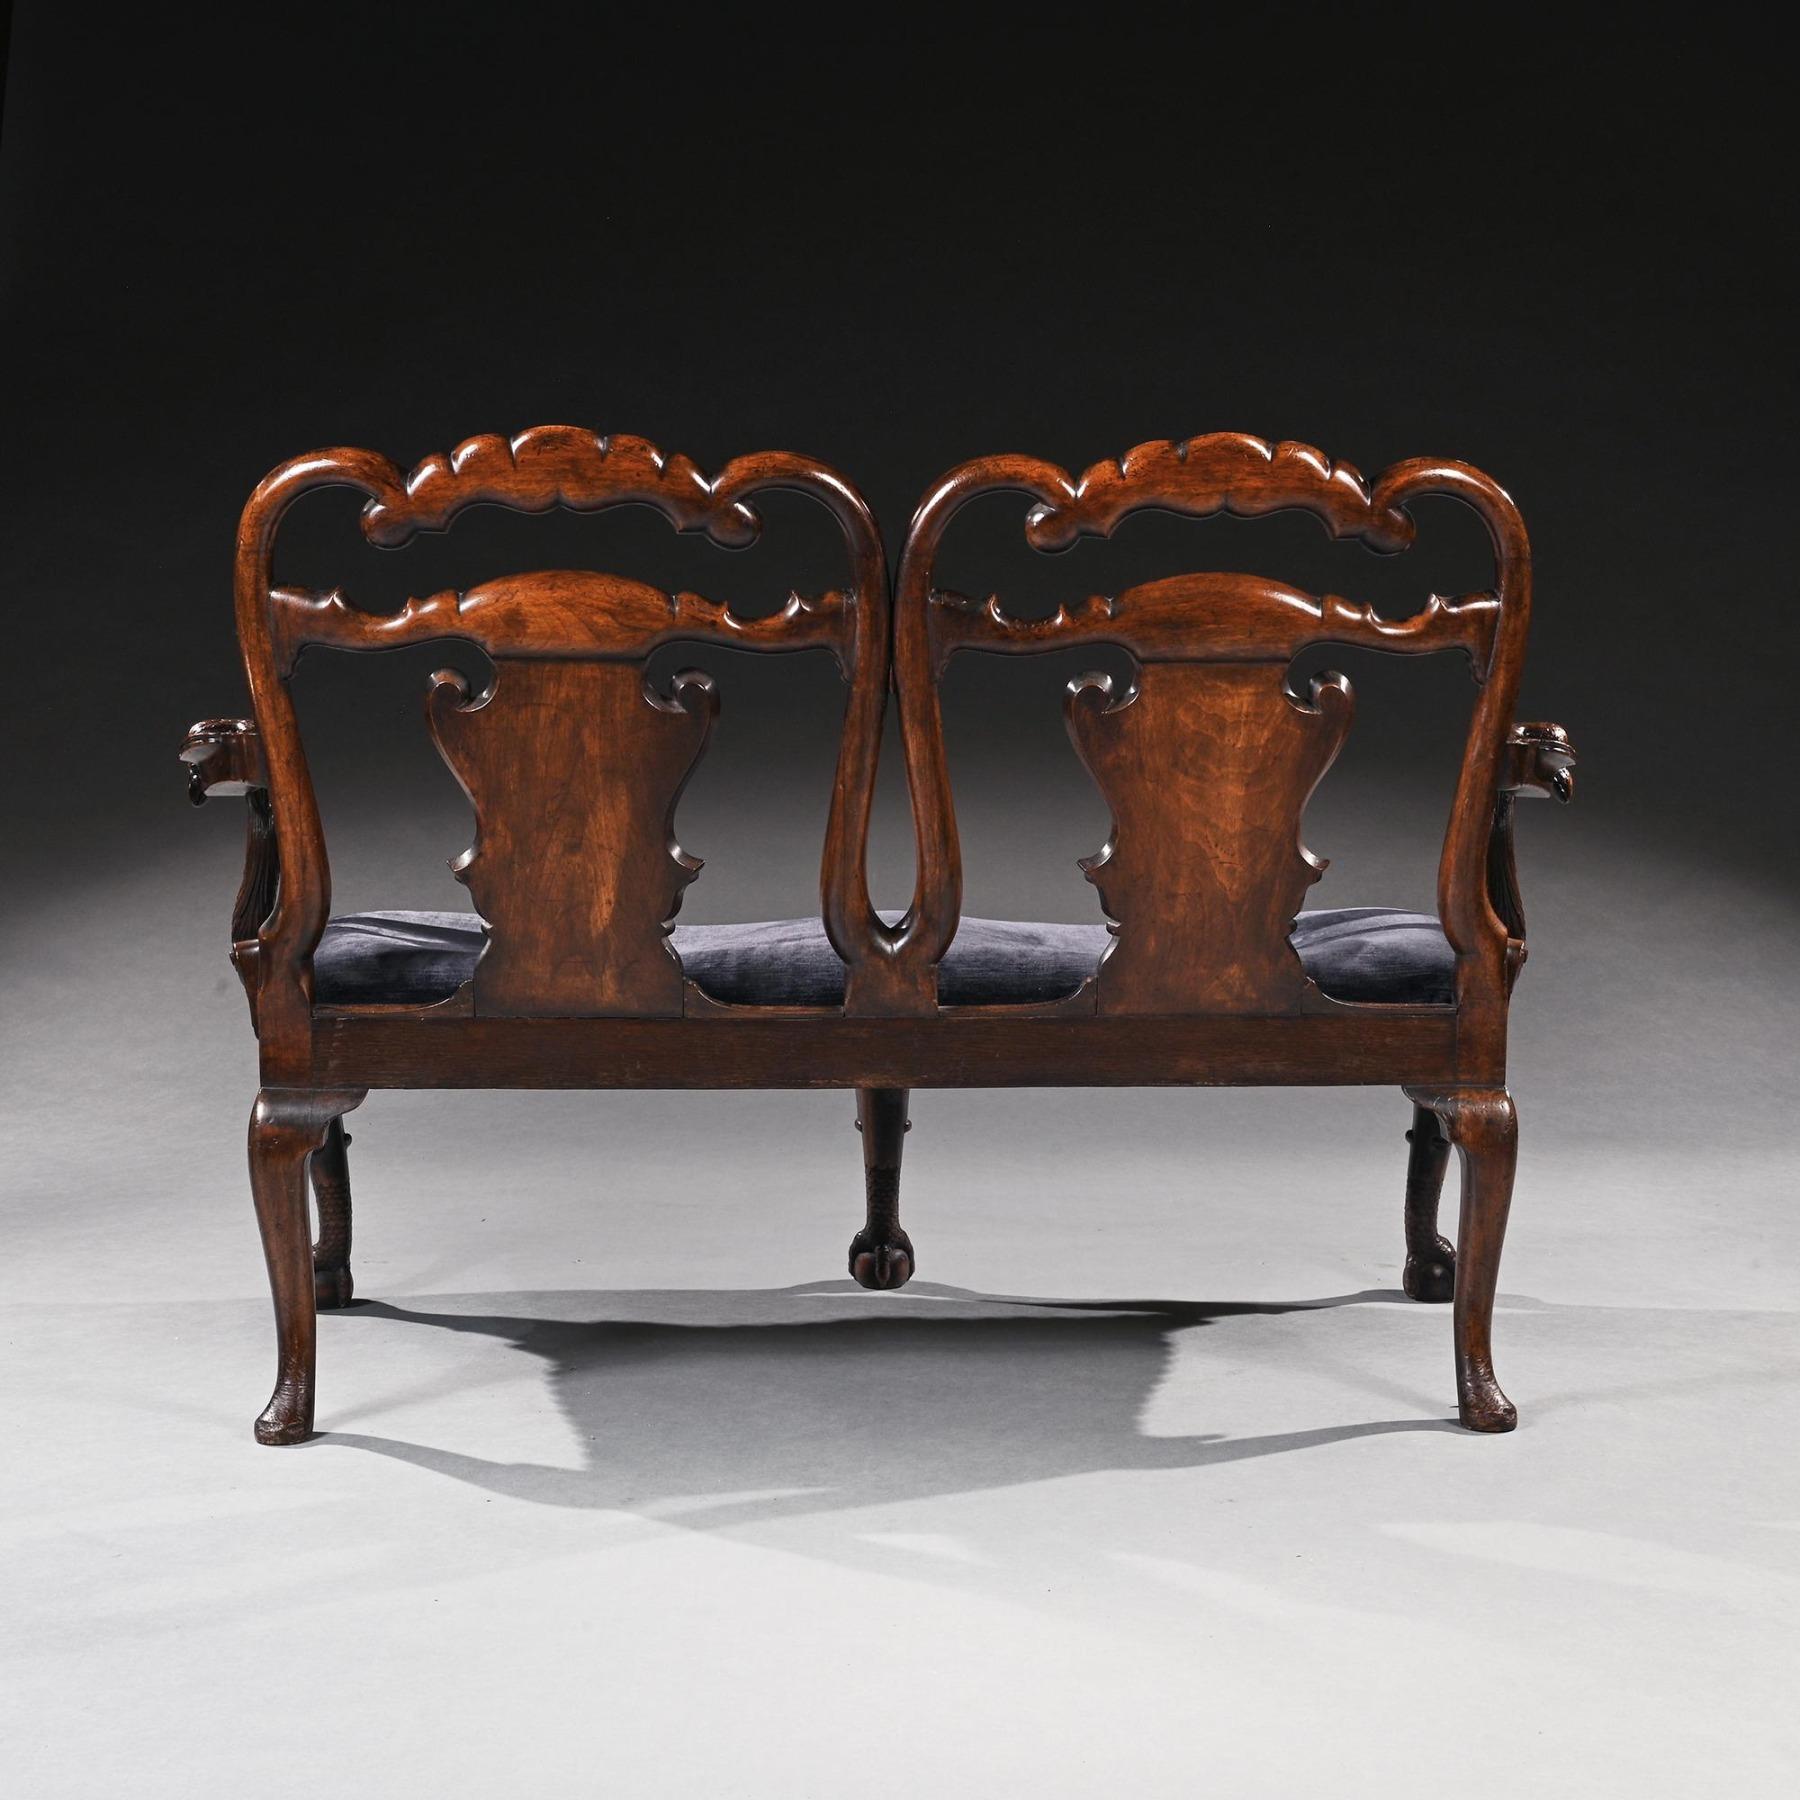 Late 19th Century Walnut Twin Chair Back Sofa After A George II Design 2